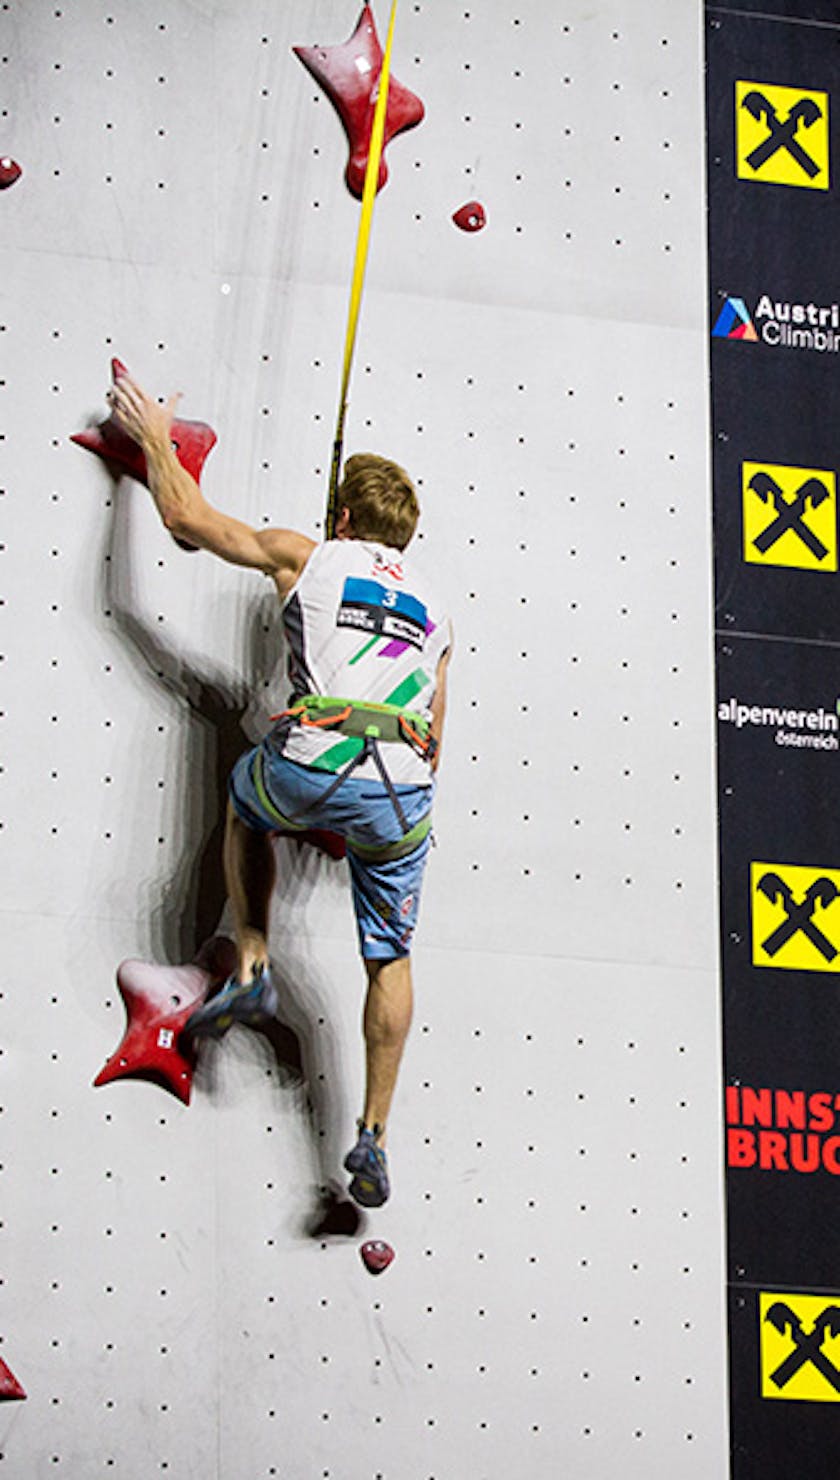 two climbers on the speed wall